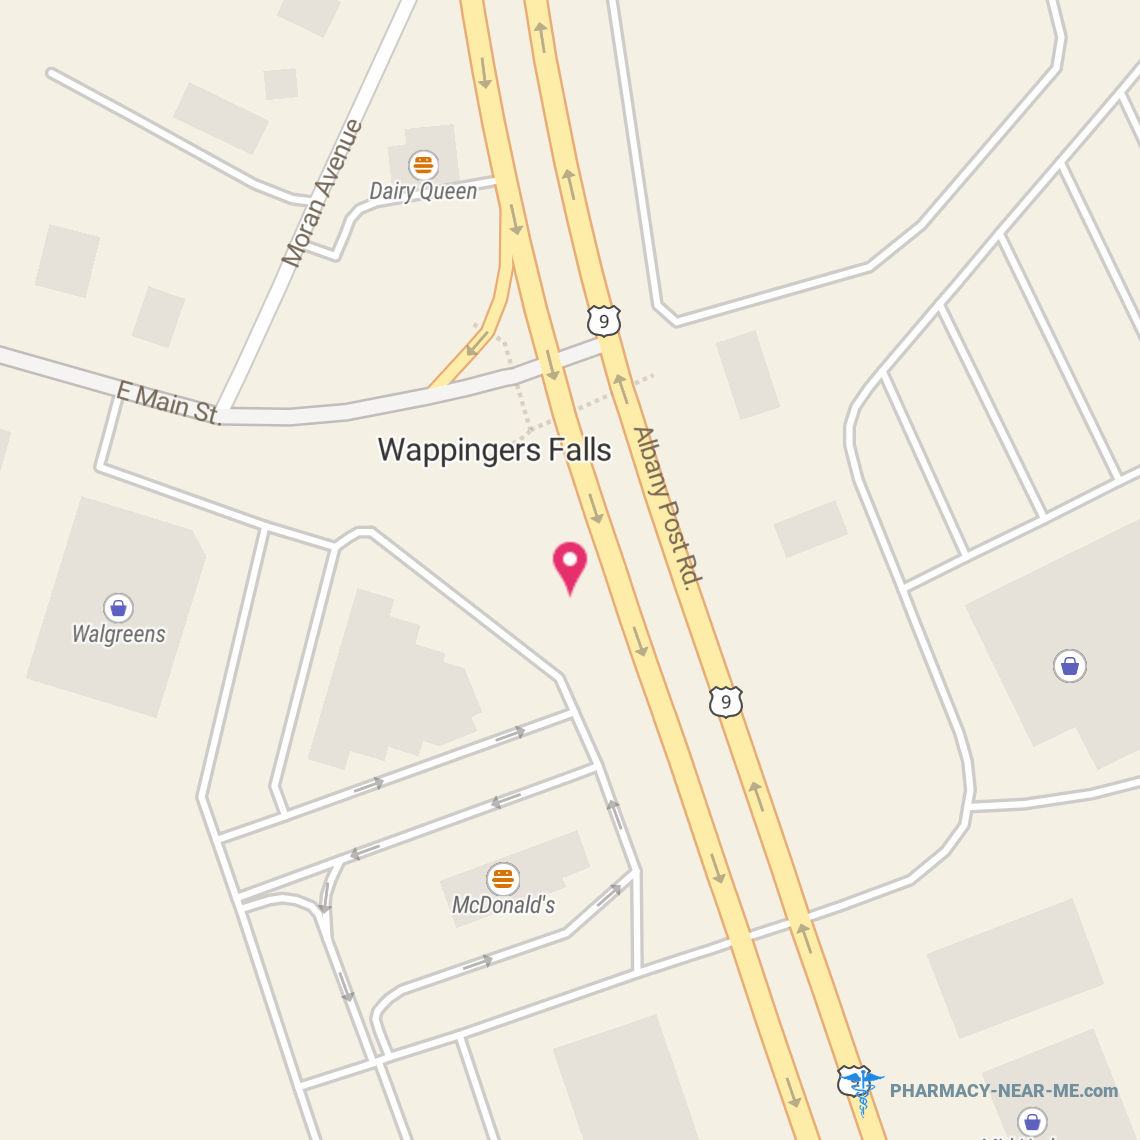 WALGREENS #12158 - Pharmacy Hours, Phone, Reviews & Information: 1575 Route 9, Wappingers Falls, New York 12590, United States